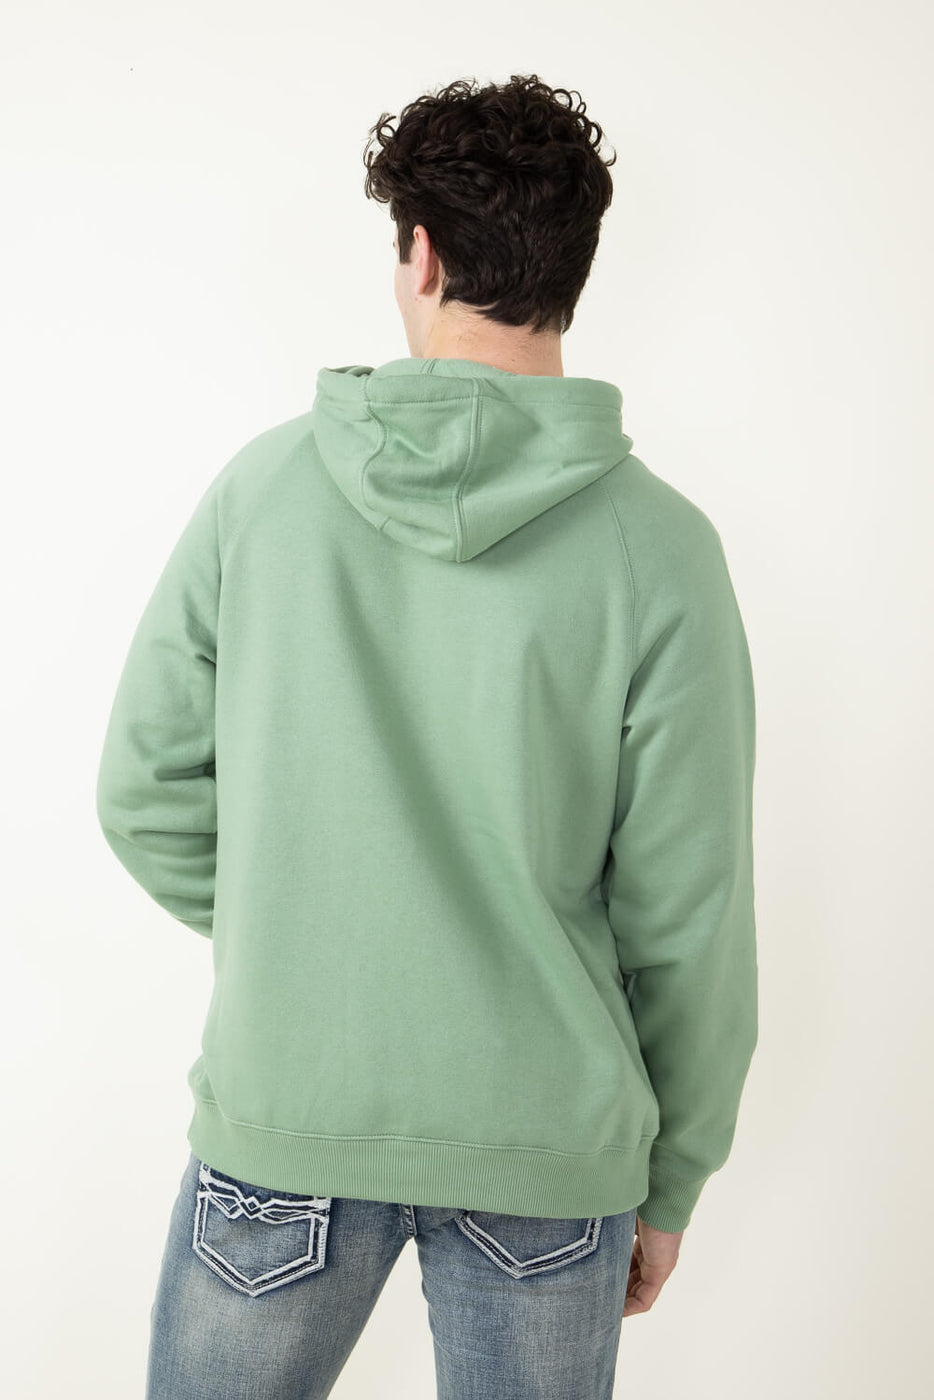 Carhartt Force Relaxed Lightweight Logo Graphic Hoodie for Men in 